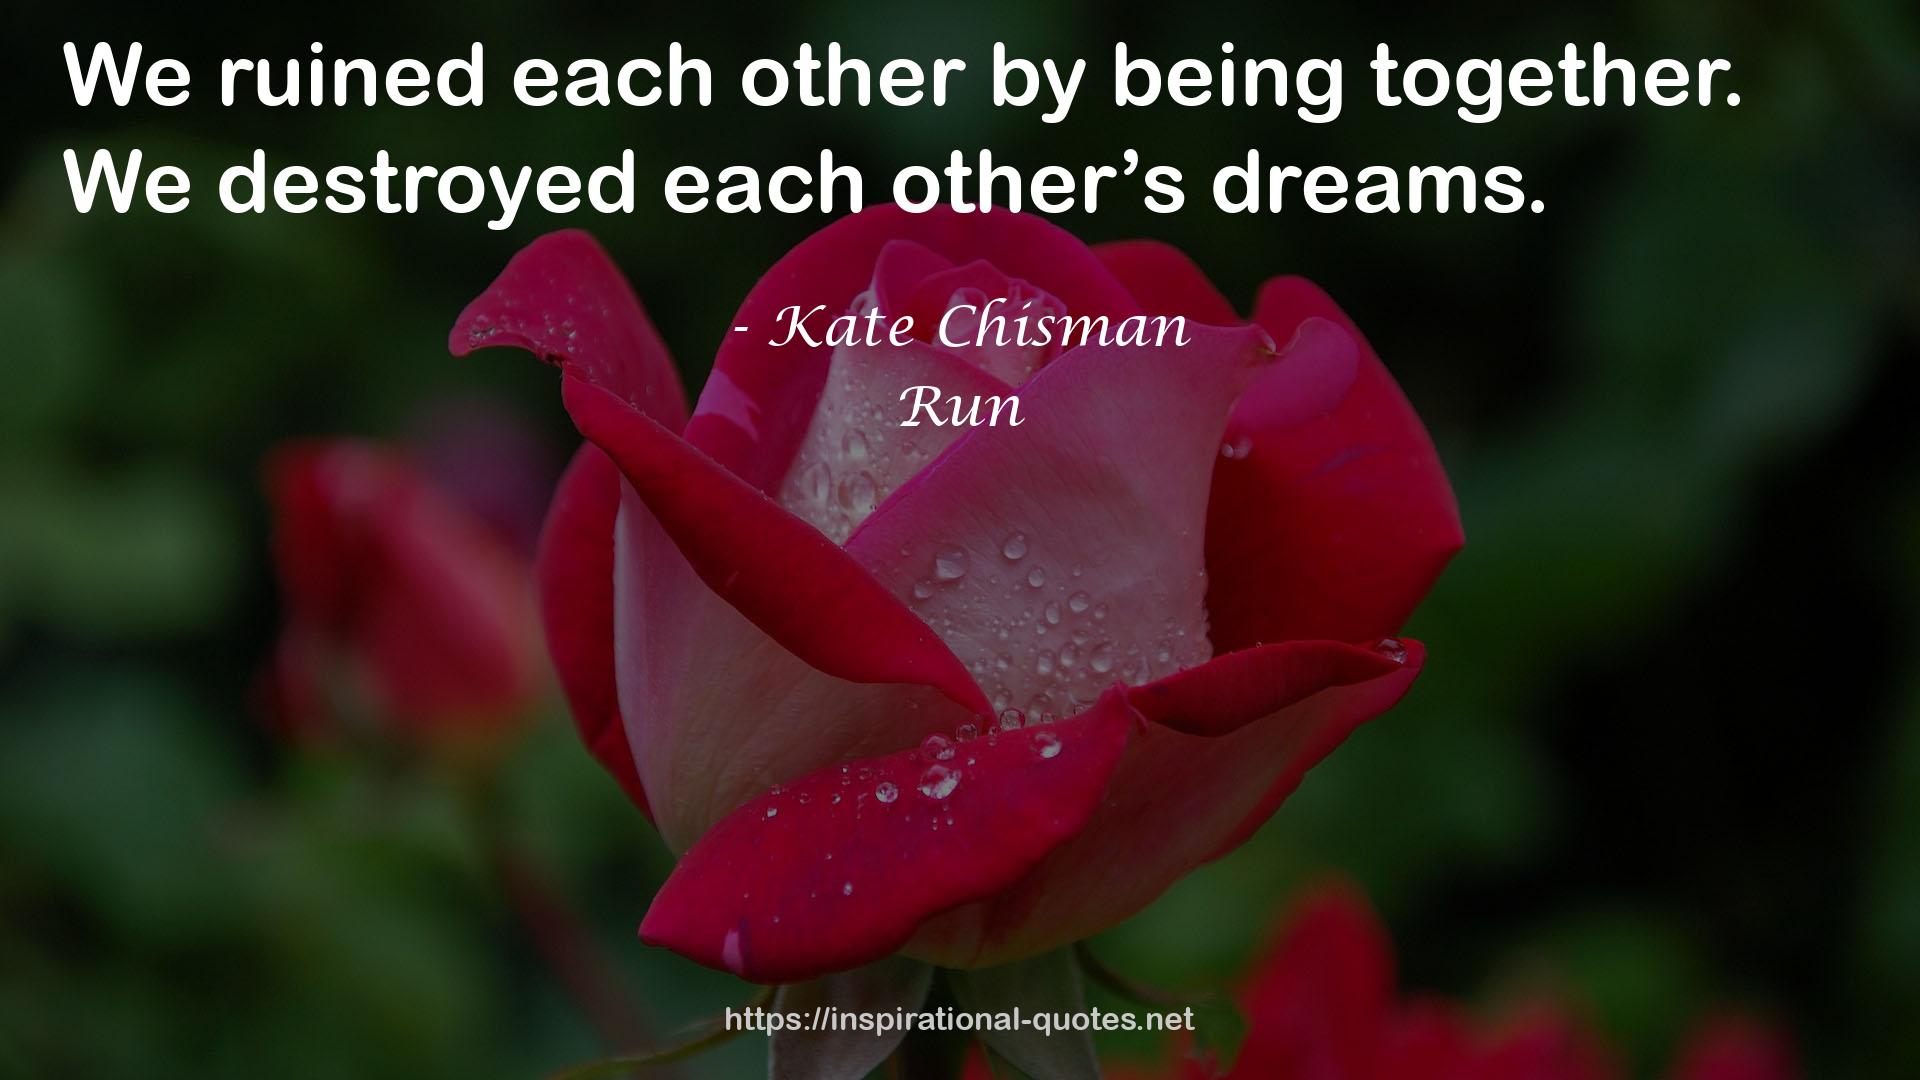 Kate Chisman QUOTES